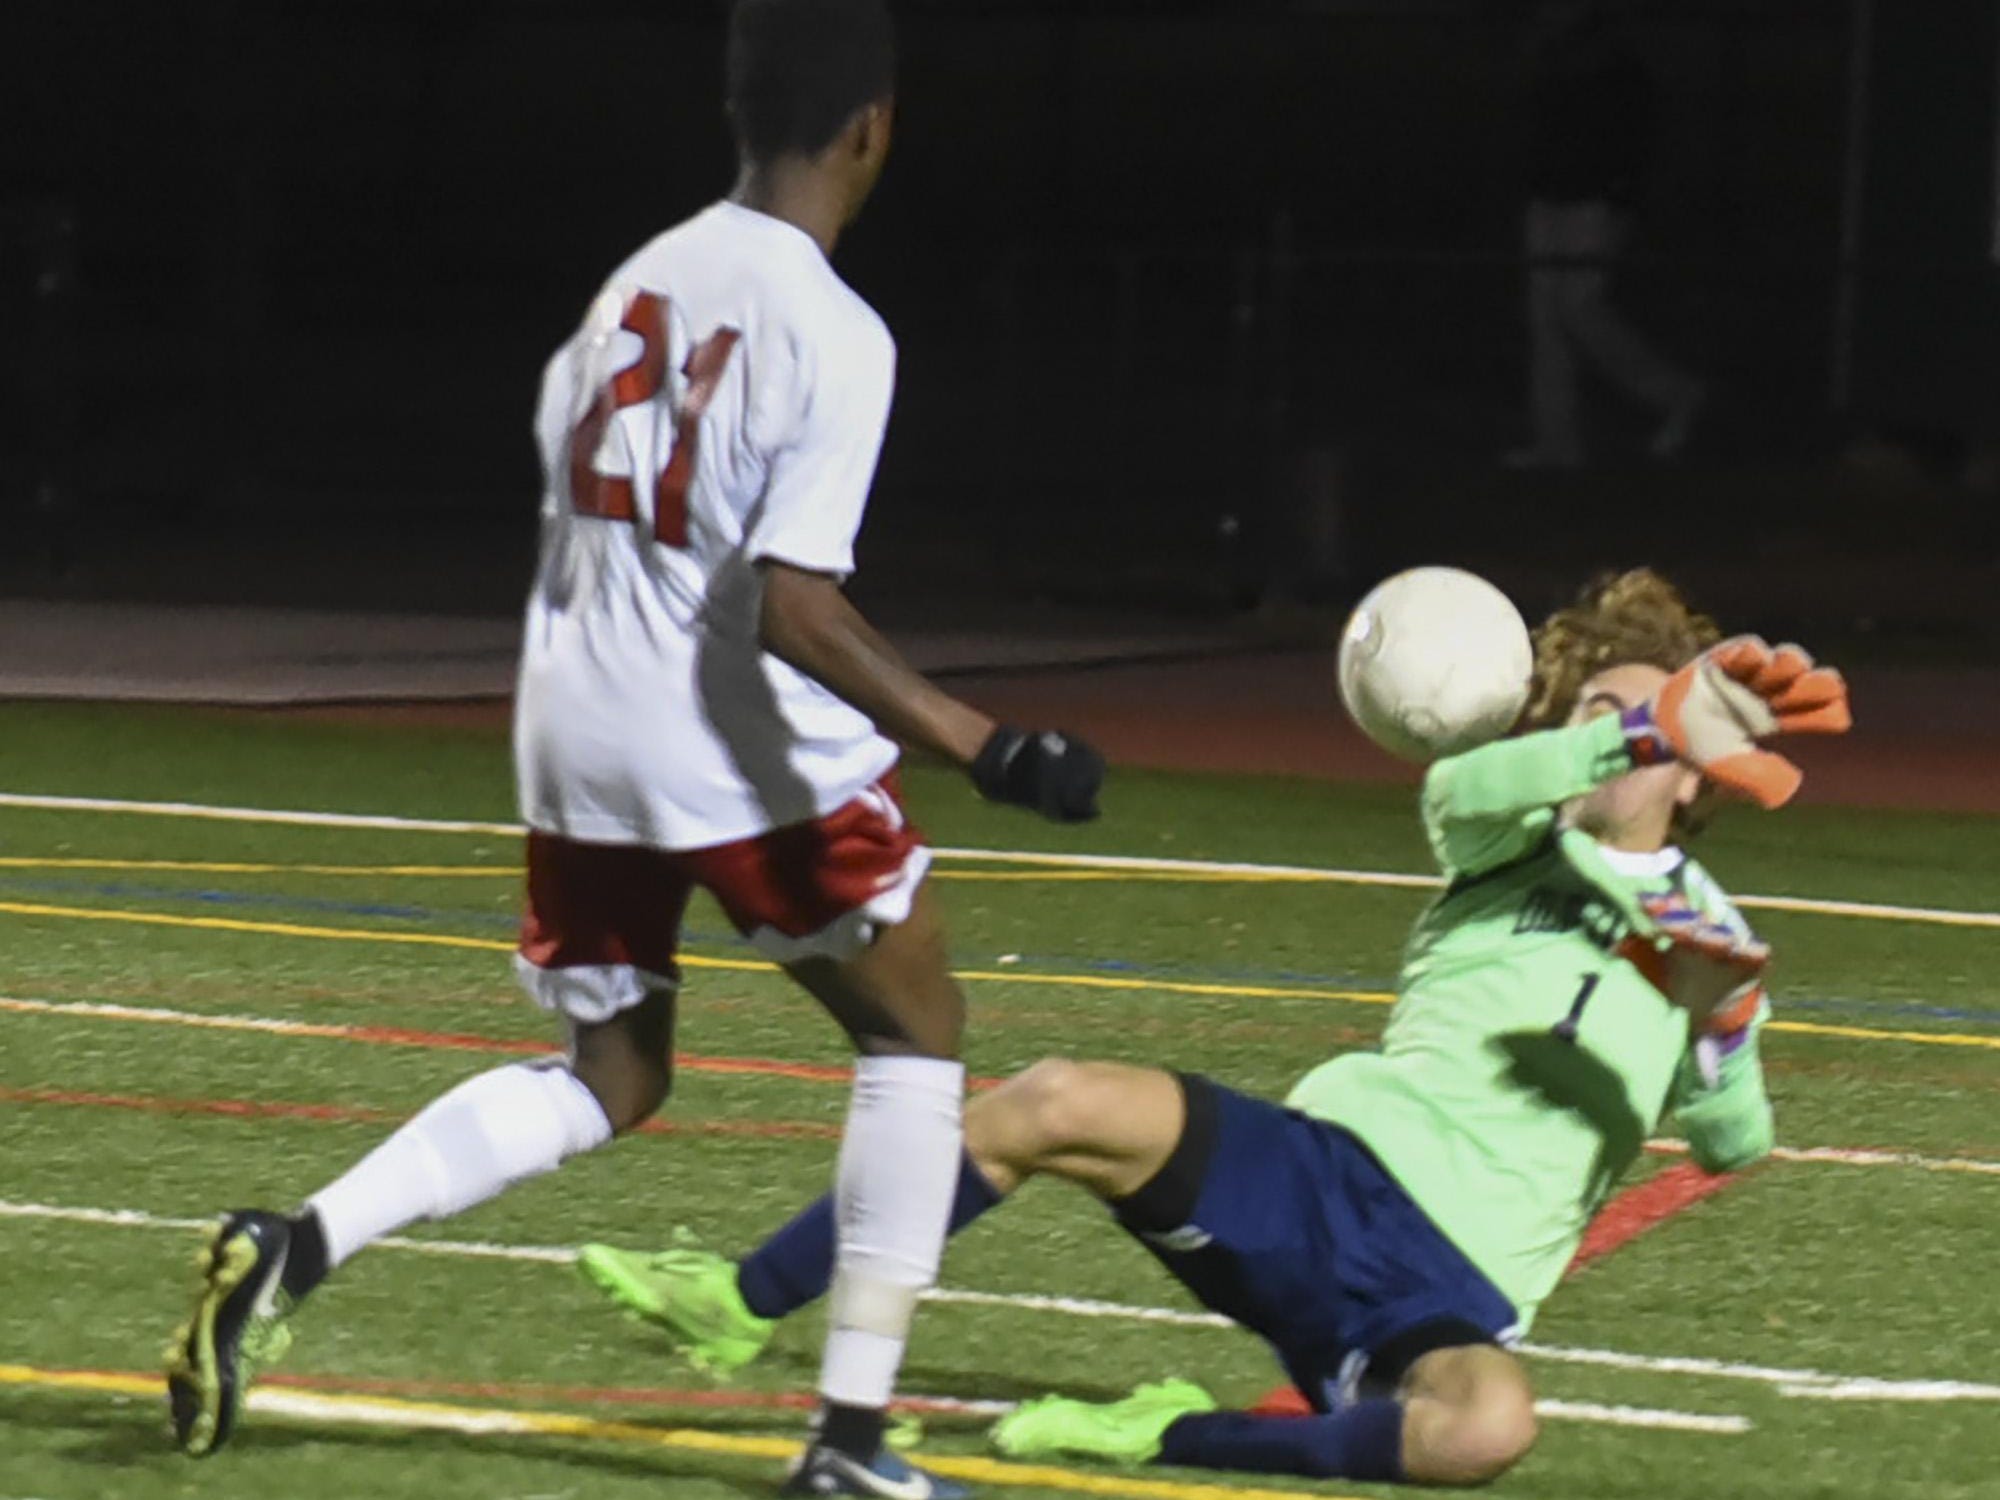 Mendham's Julian Montilus (21) beats Old Tappan goalie Jake Fiore (1) for the first score in the game in the NJSIAA Group III Semifinal at Ridge High School in Basking Ridge, November 17, 2015. Photo by Warren Wetura for the Daily Record.